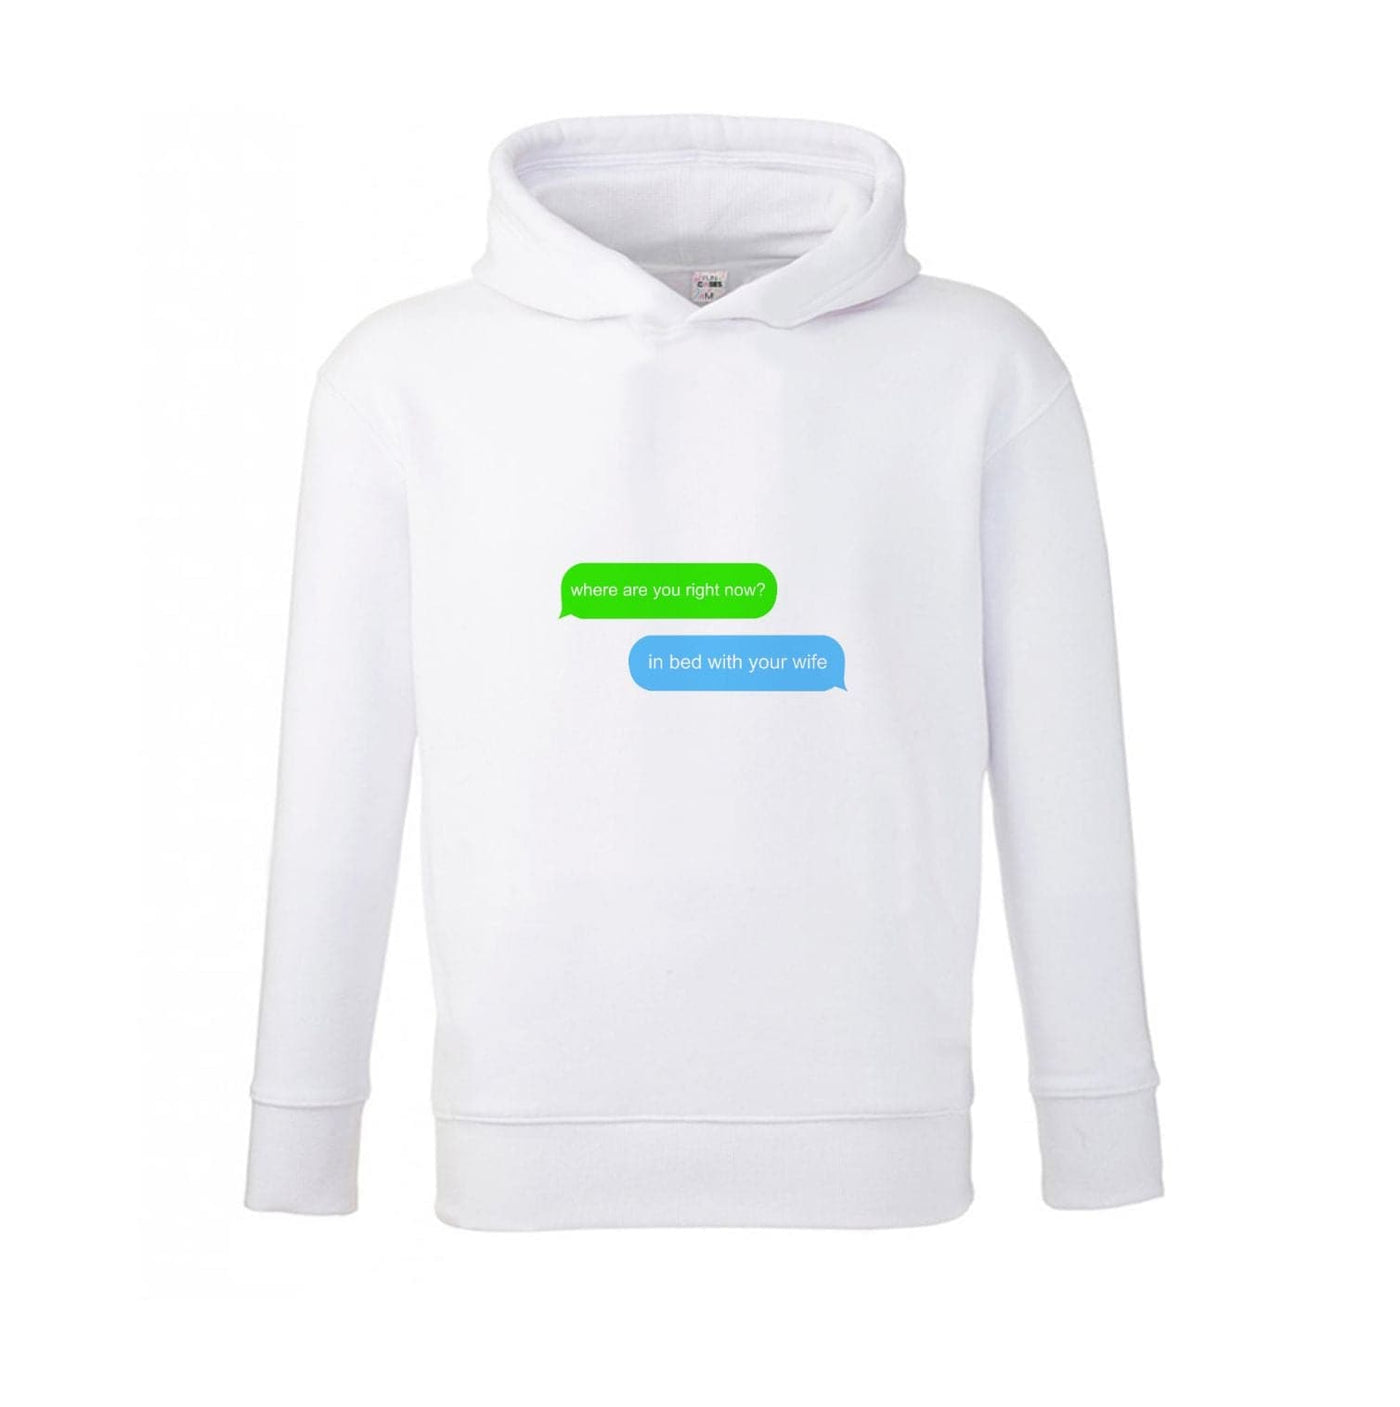 Where Are You Right Now? - Pete Davidson Kids Hoodie